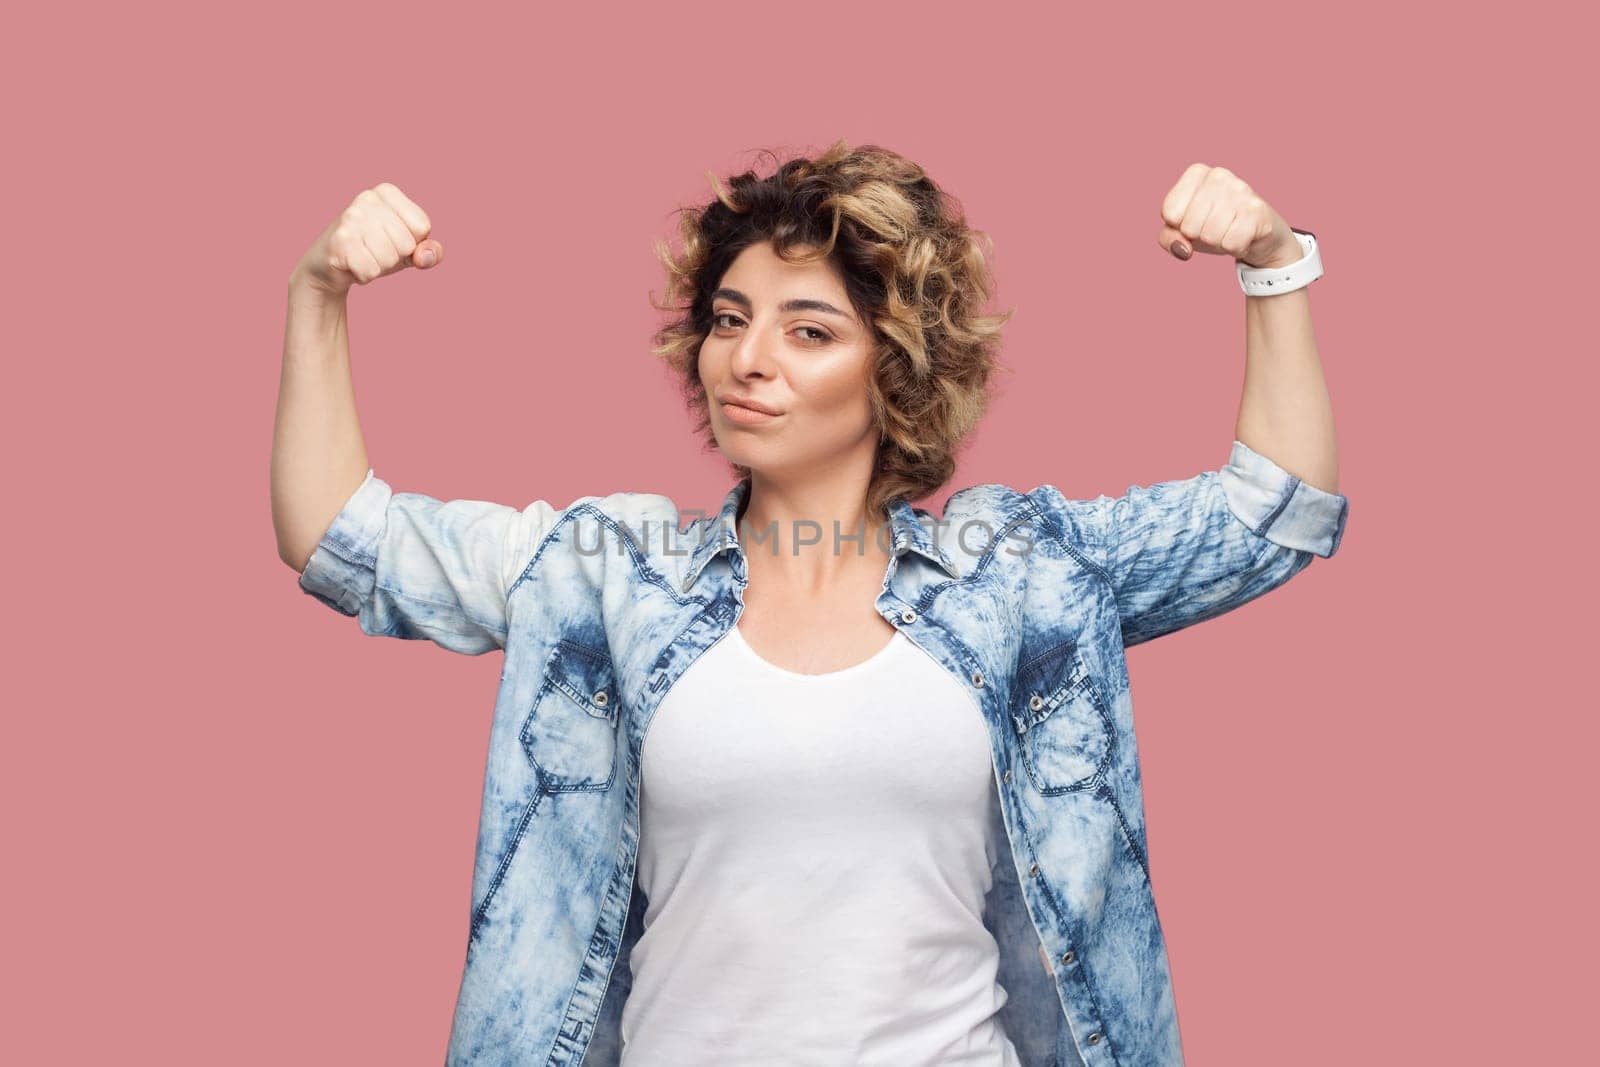 Portrait of self confident strong woman with curly hairstyle wearing blue shirt standing with raised arms, showing her power, looking at camera. Indoor studio shot isolated on pink background.